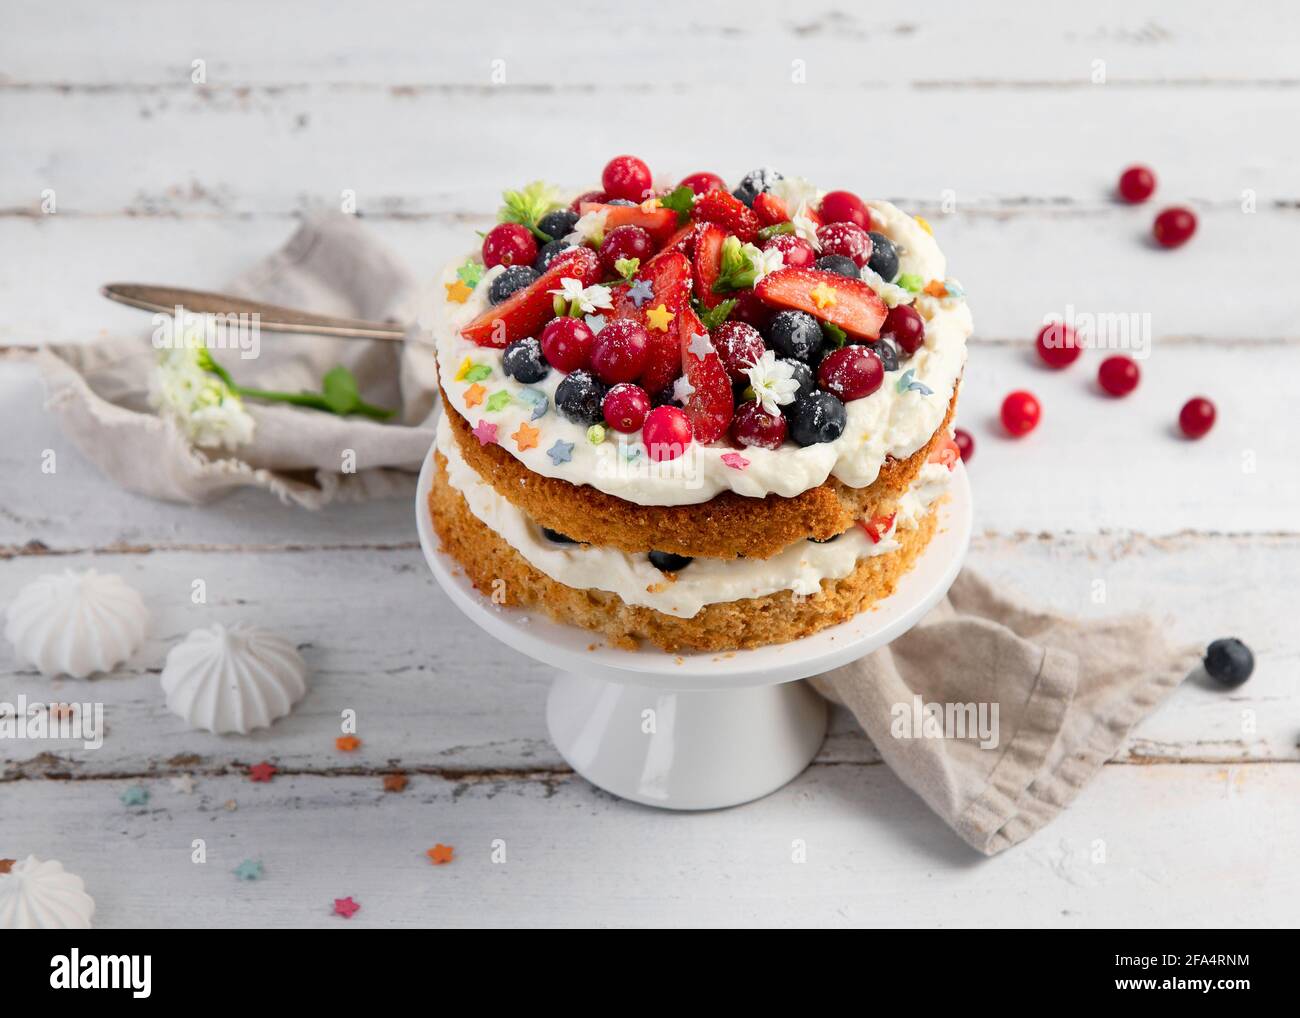 Delicious homemade cake with fresh berries and mascarpone cream on wooden background. Top view, copy space Stock Photo